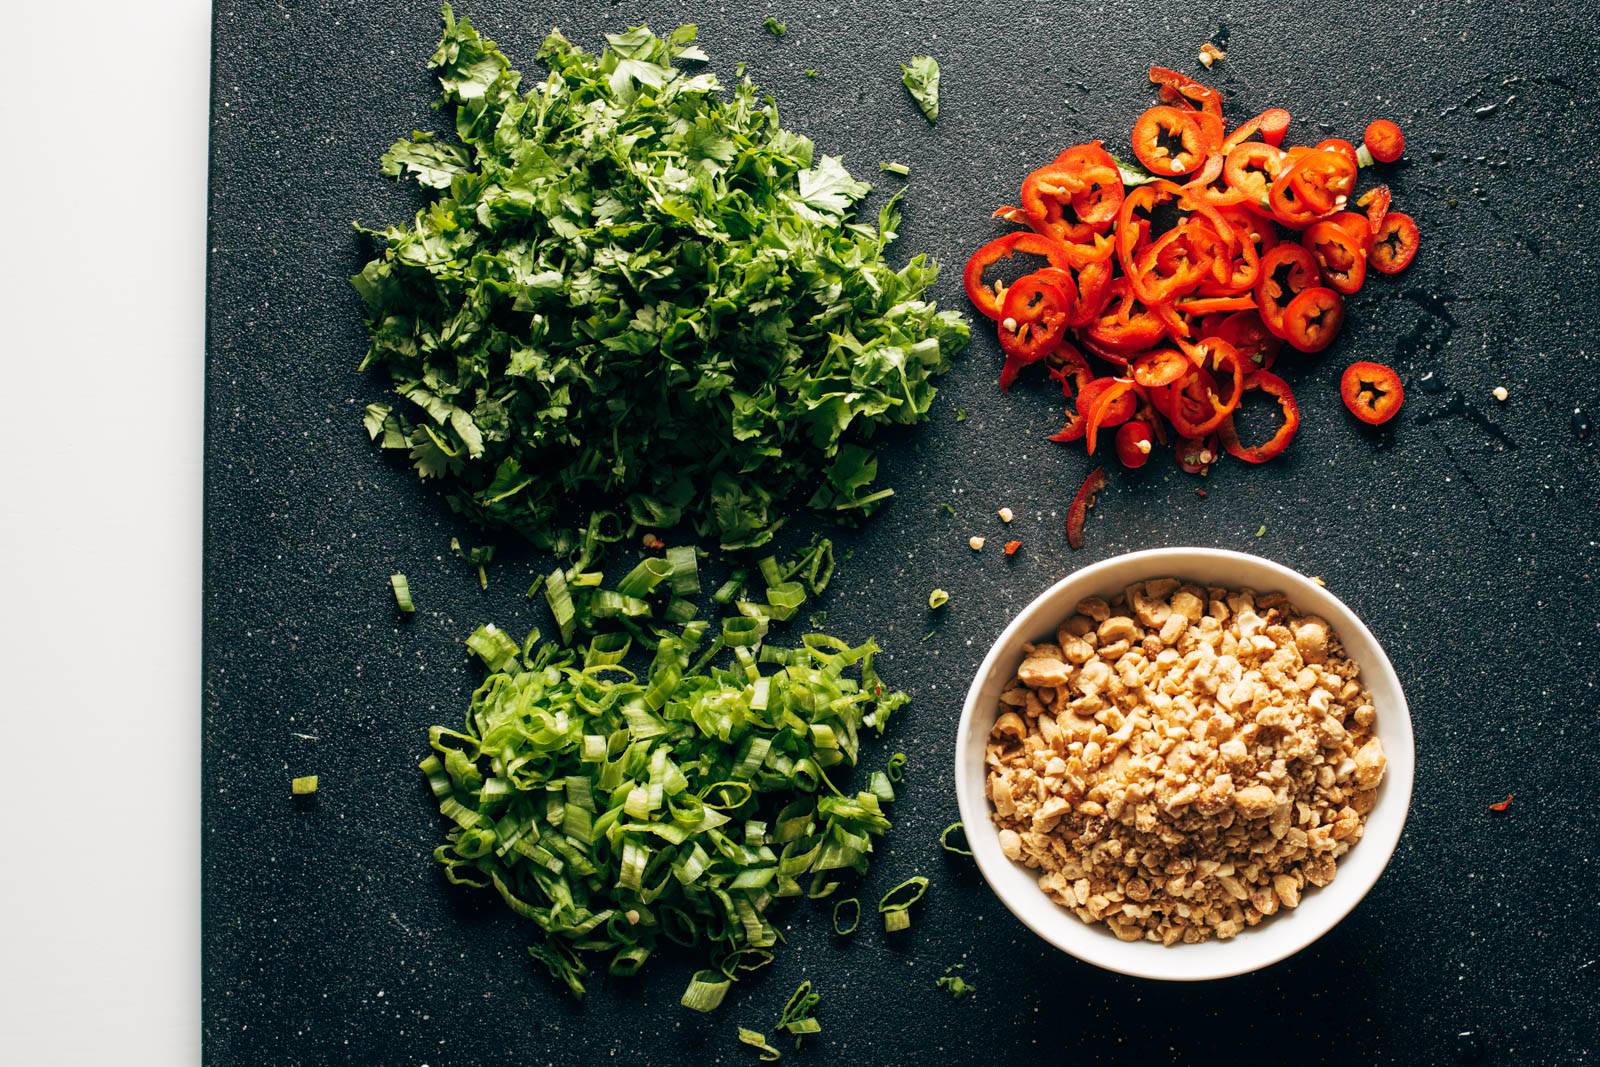 Chopped herbs, peppers and peanuts on a cutting board